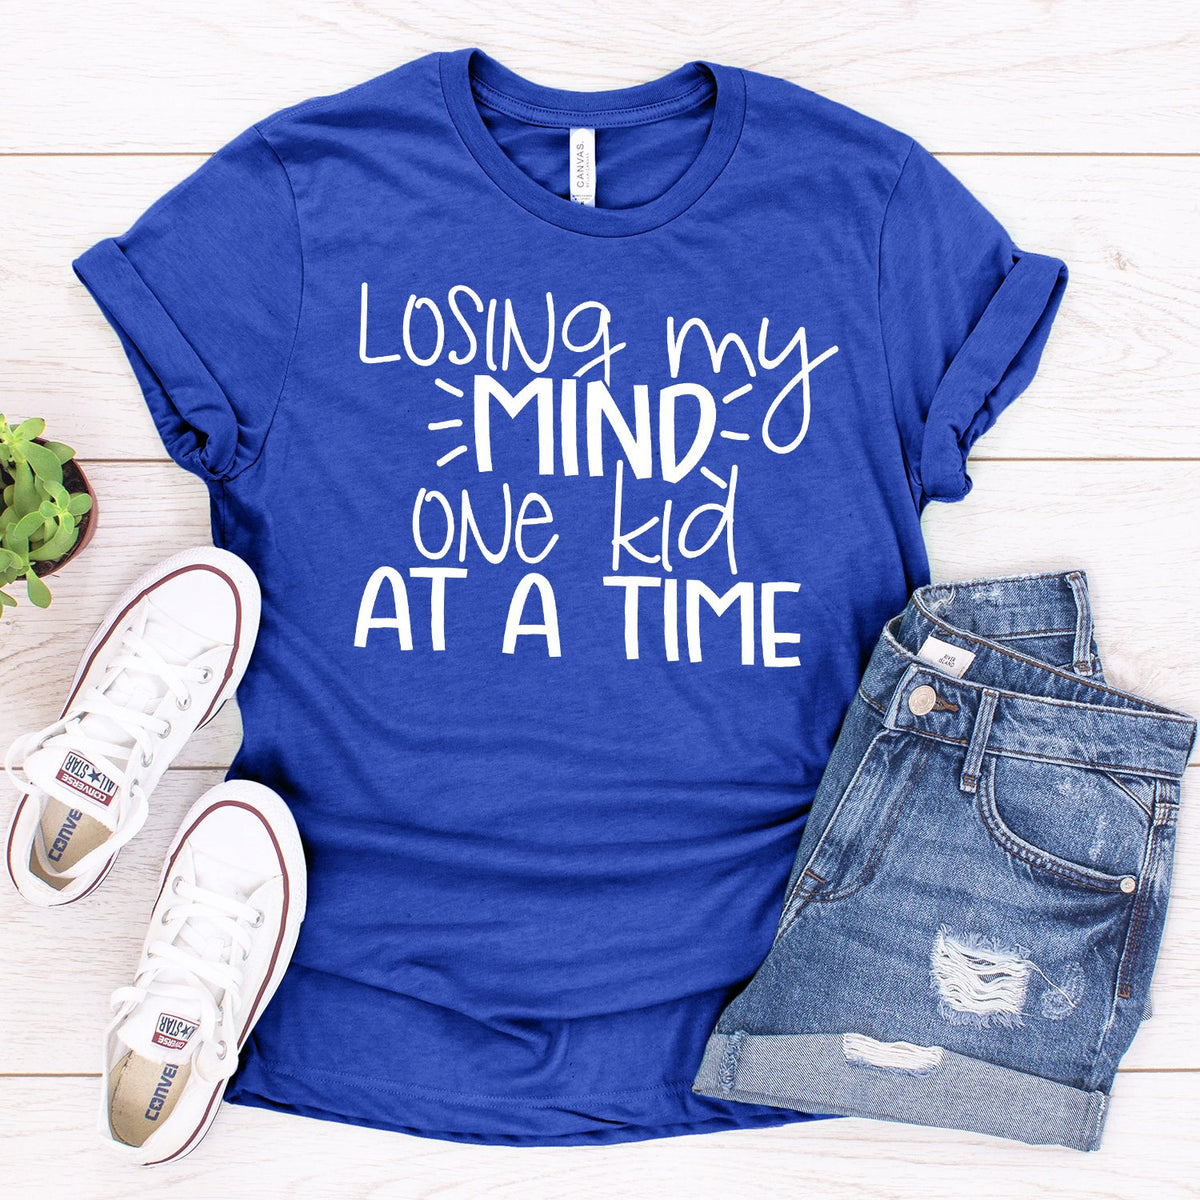 Losing My Mind One Kid At A Time - Short Sleeve Tee Shirt